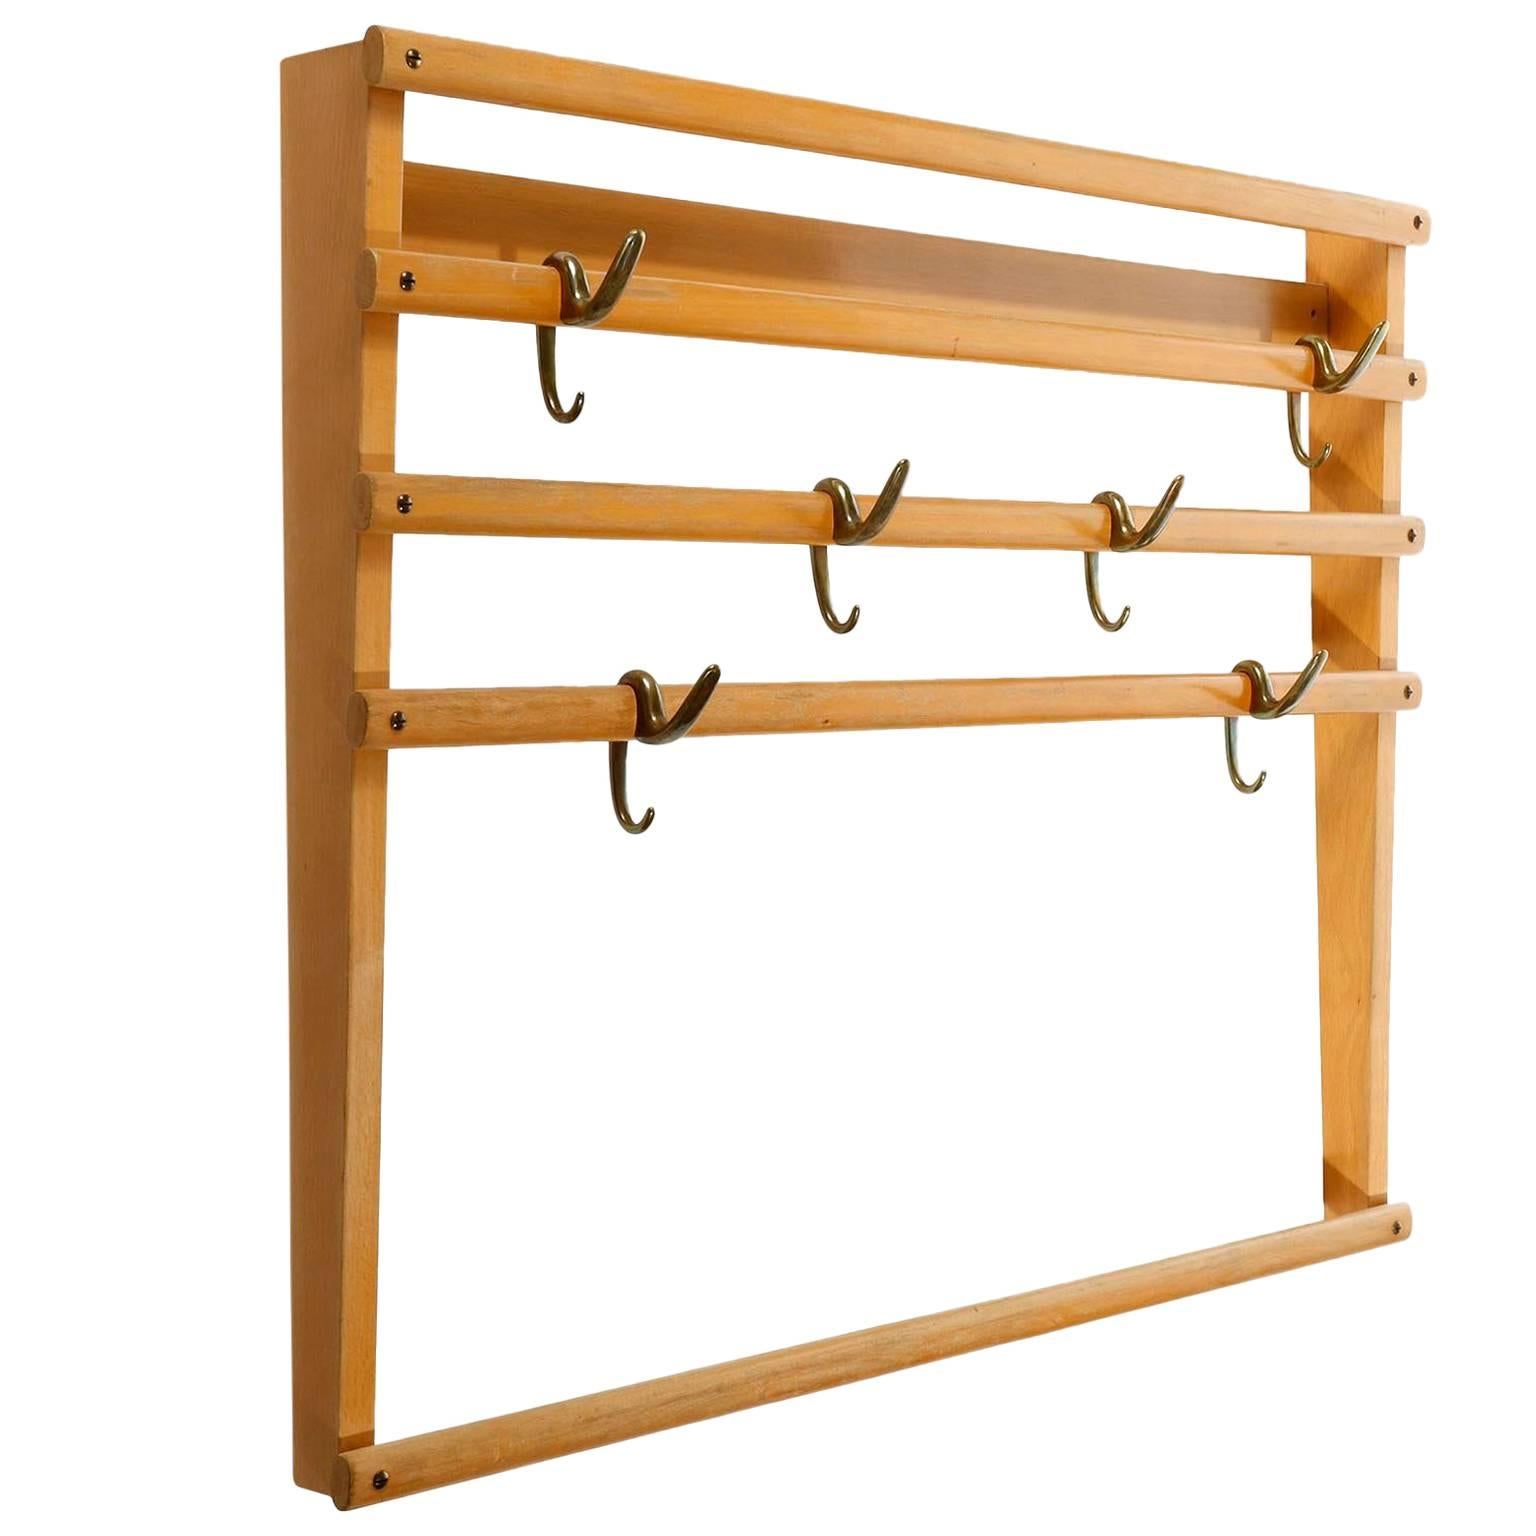 A wardrobe by Carl Auböck, Vienna, Austria, manufactured in midcentury, circa 1950.
It is made of a beech wood frame in an aged and very warm tone. There are six patinated brass hooks (similar to bronze) which can be positioned randomly on the